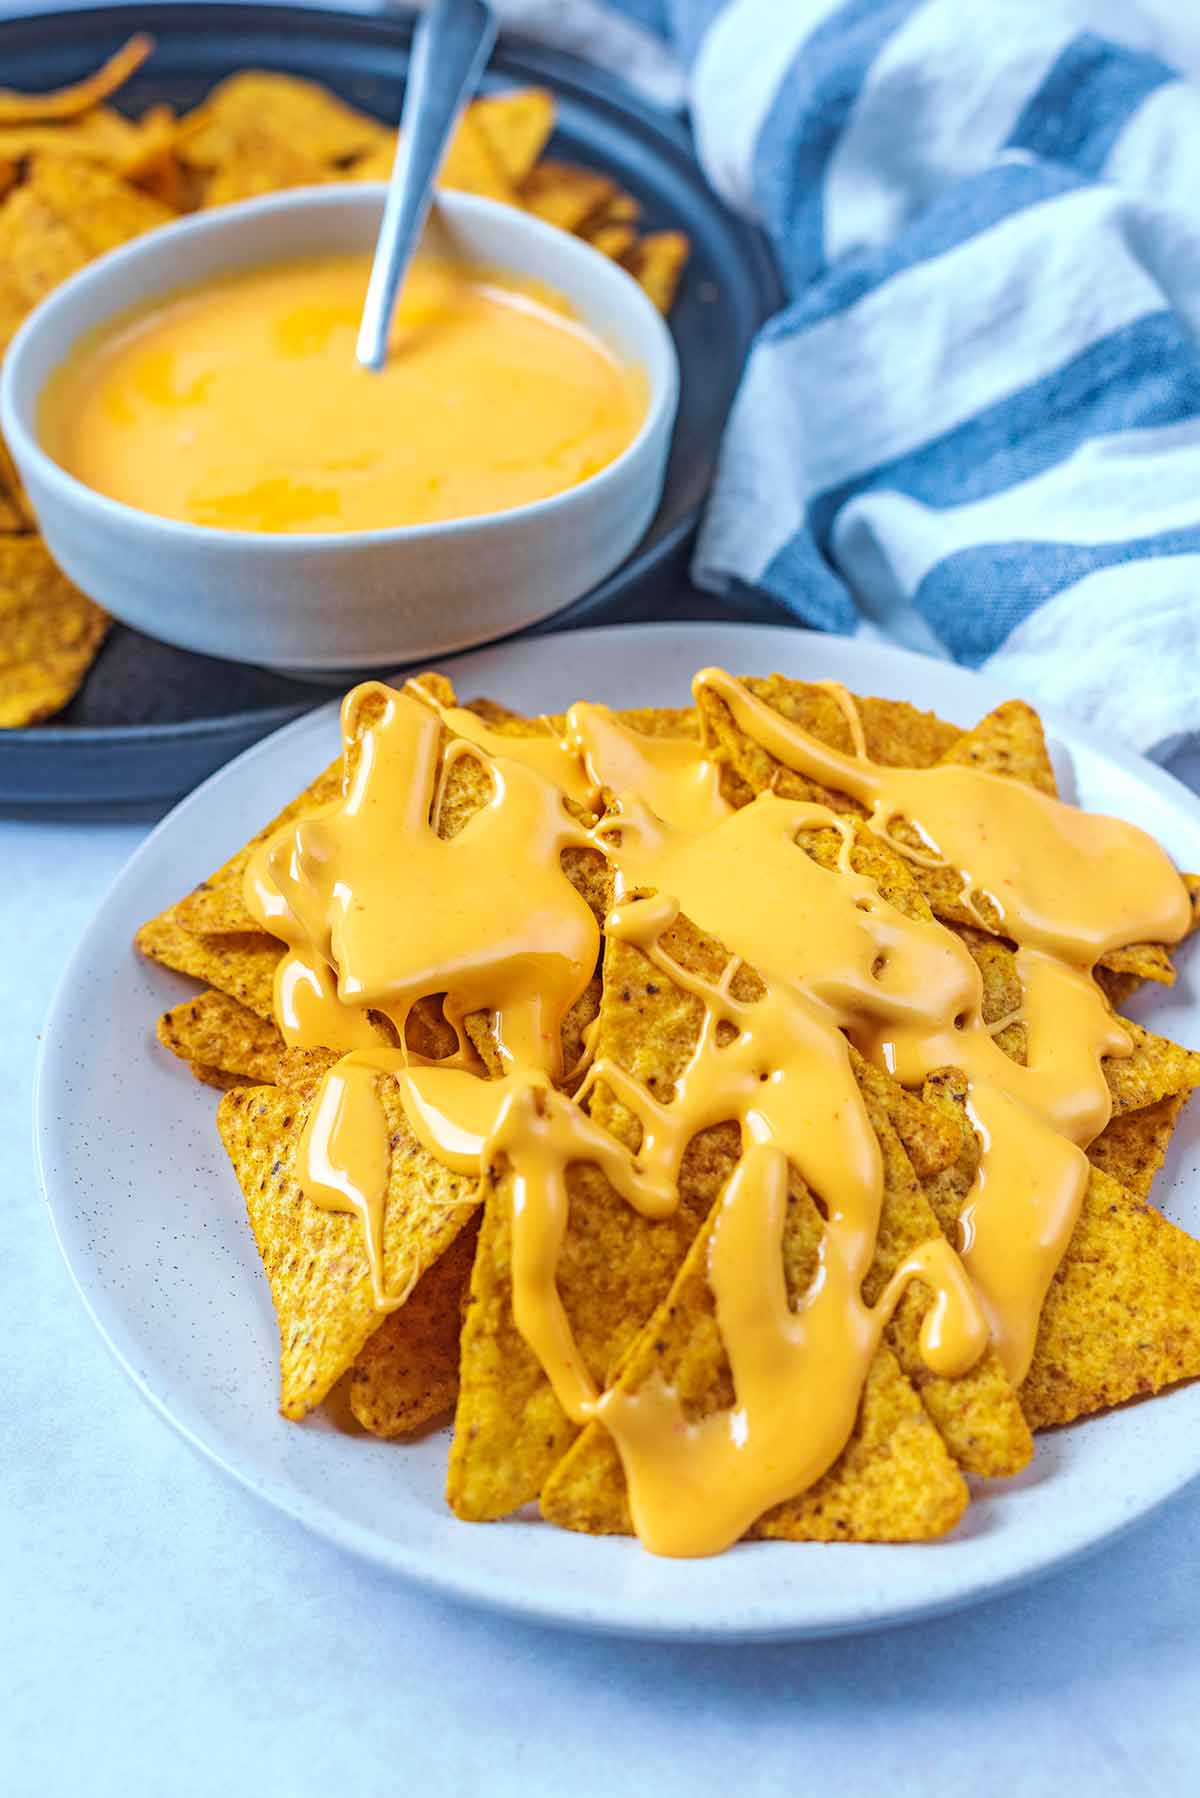 Tortilla chips smothered on nacho sauce with a bowl of sauce in the background.